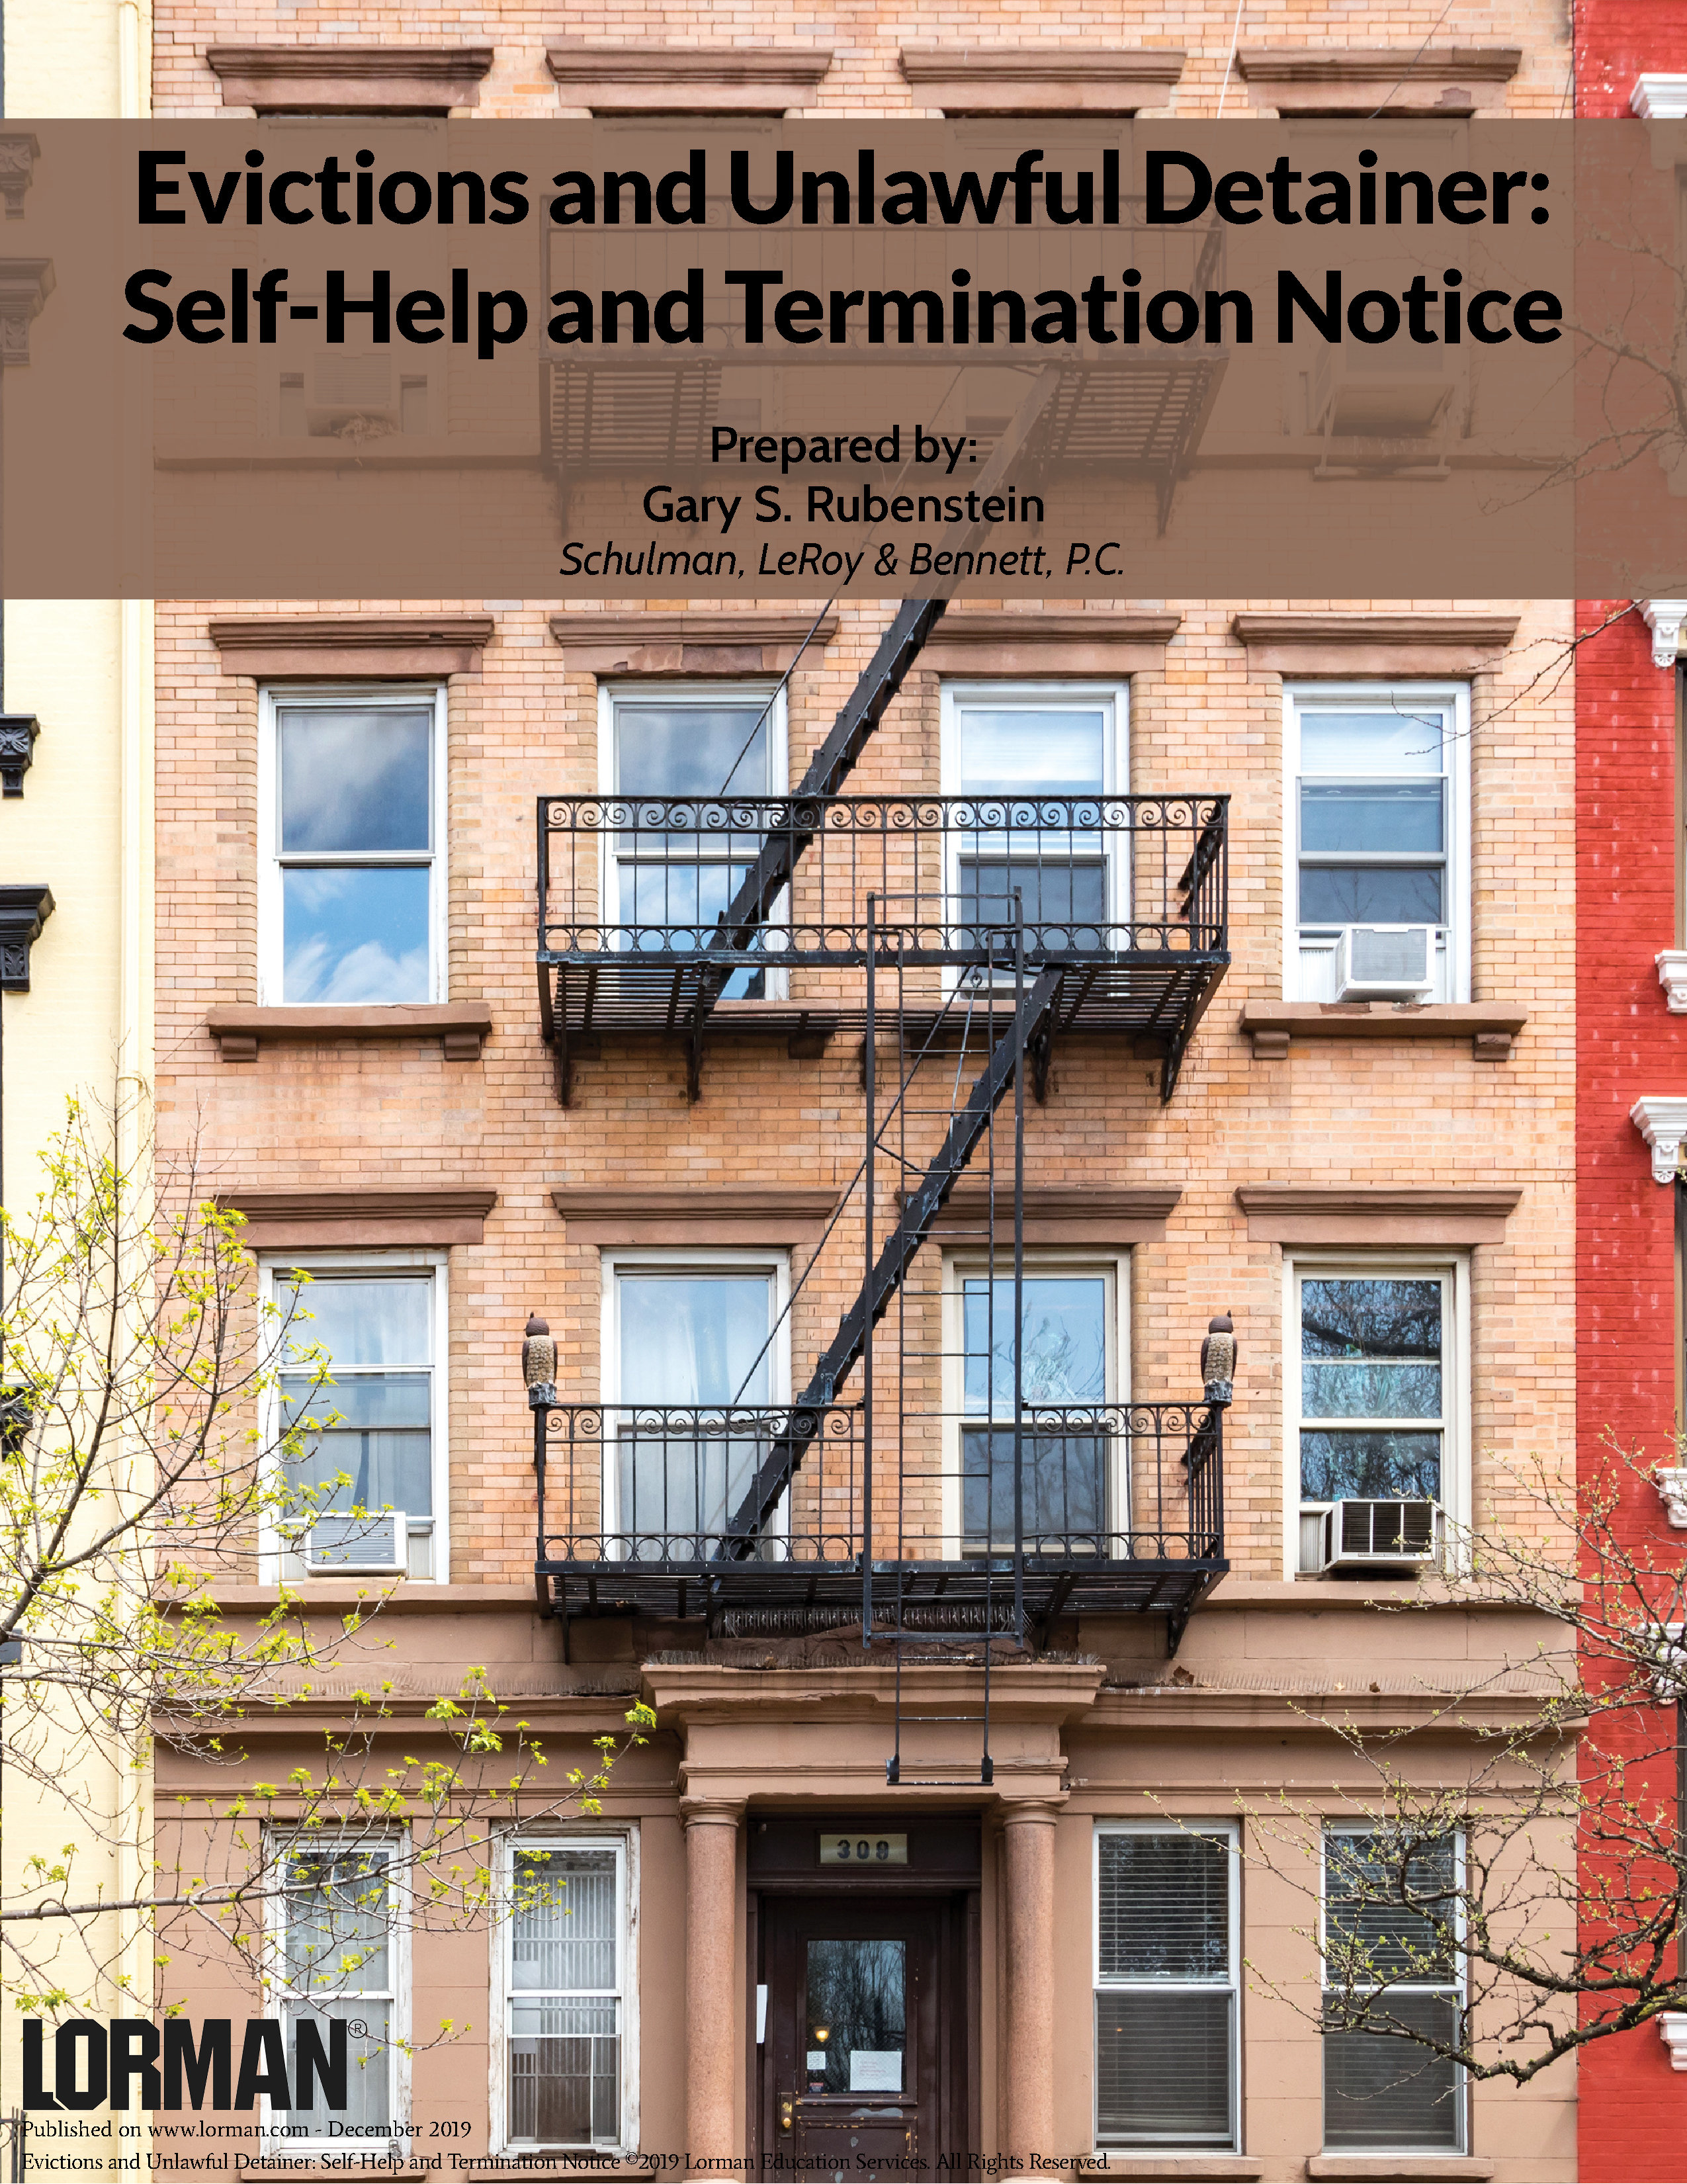 Evictions and Unlawful Detainer: Self-Help and Termination Notice